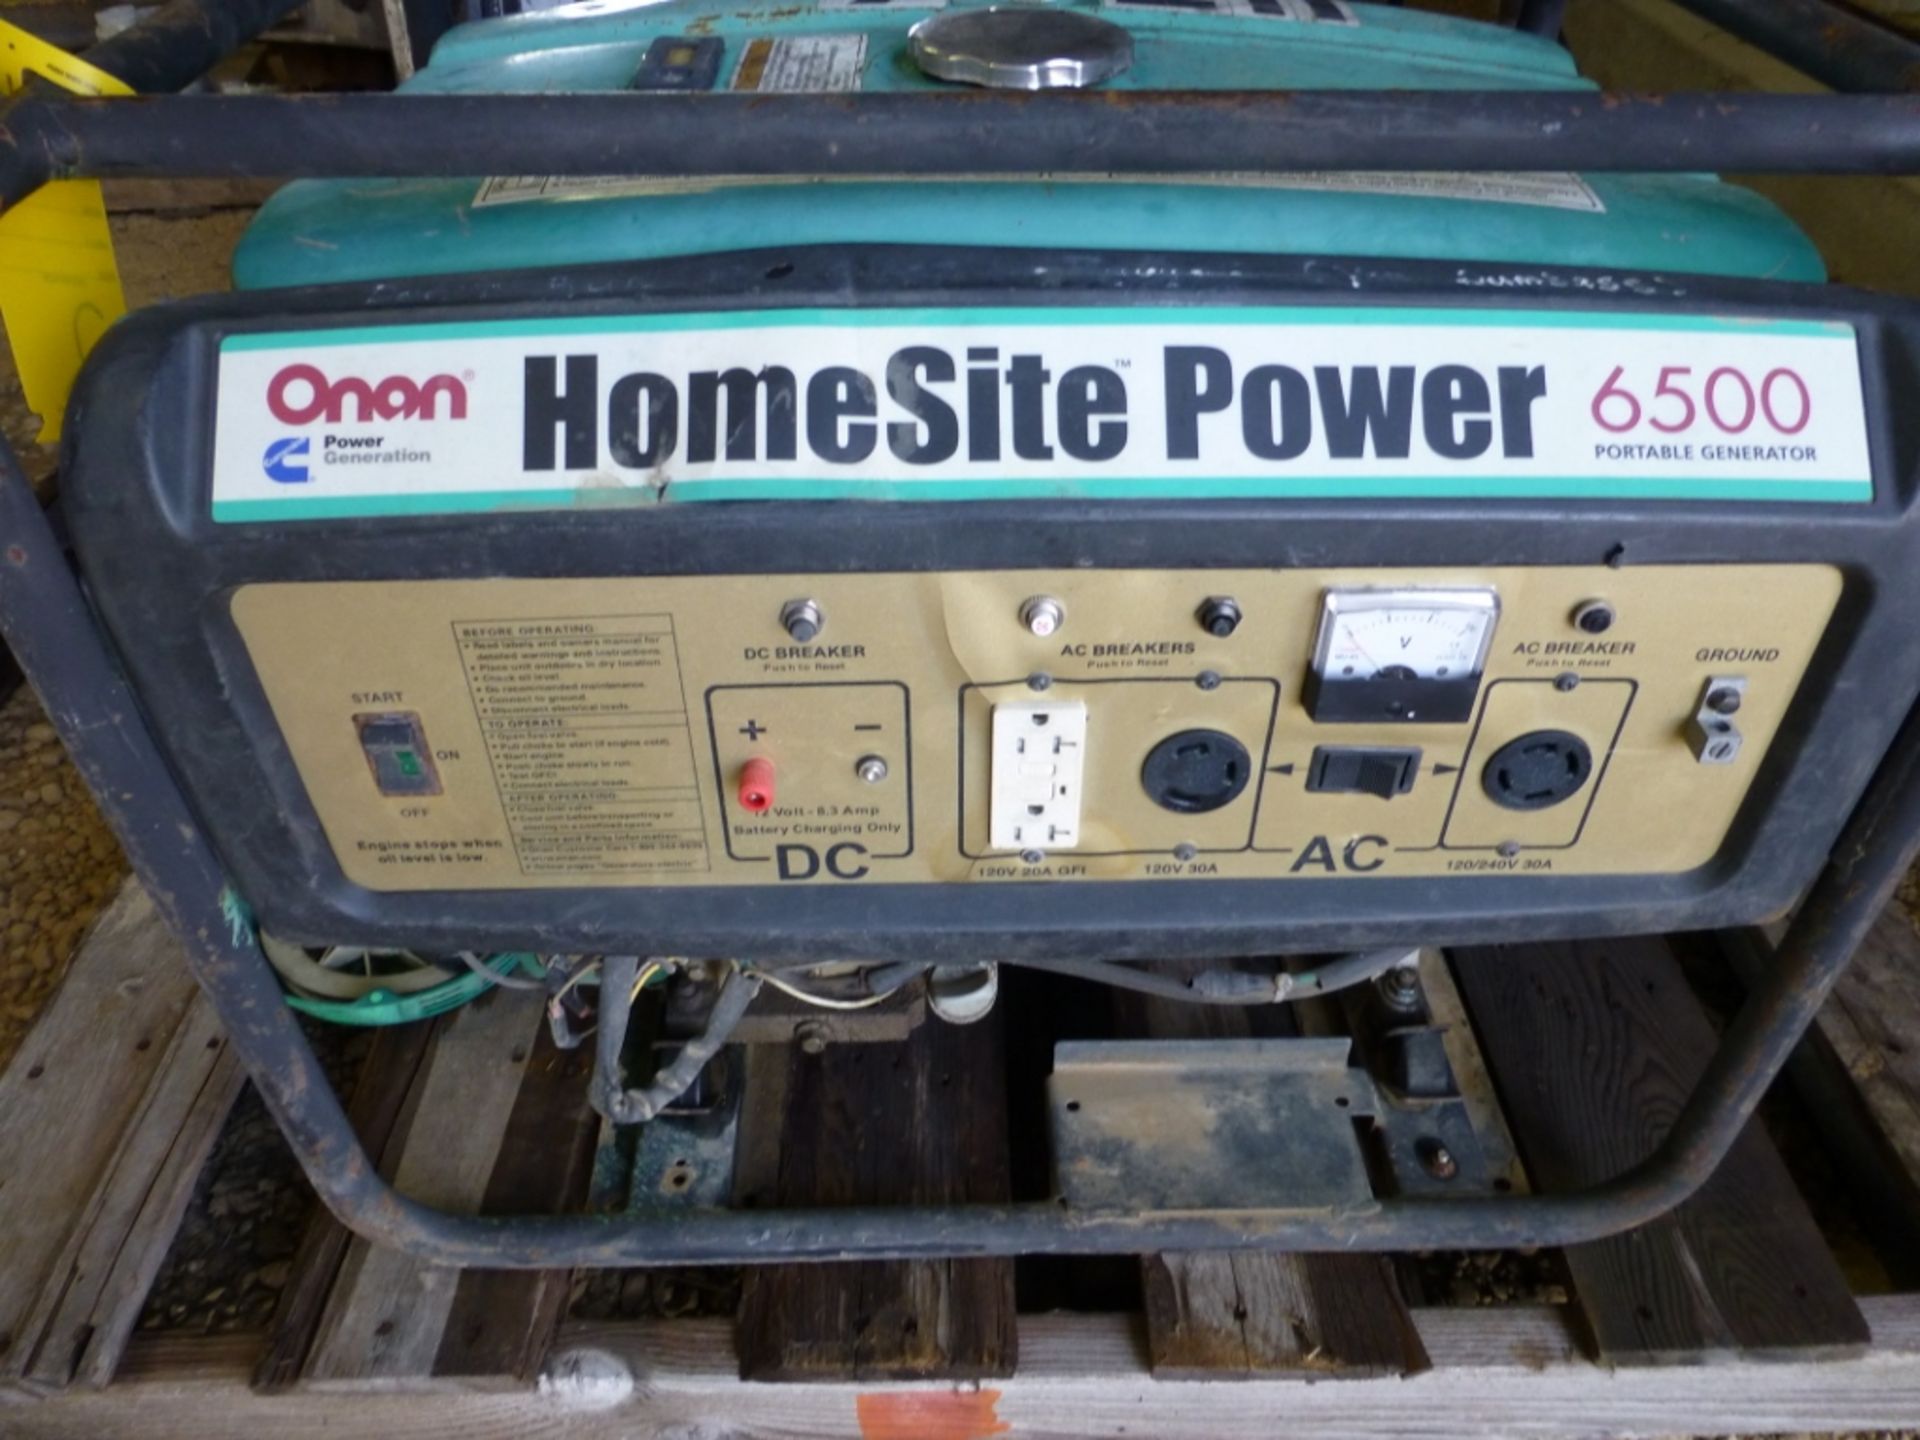 Homesite power 6500 generator, missing recoil, with blue generator, unknown working condition - Image 3 of 5